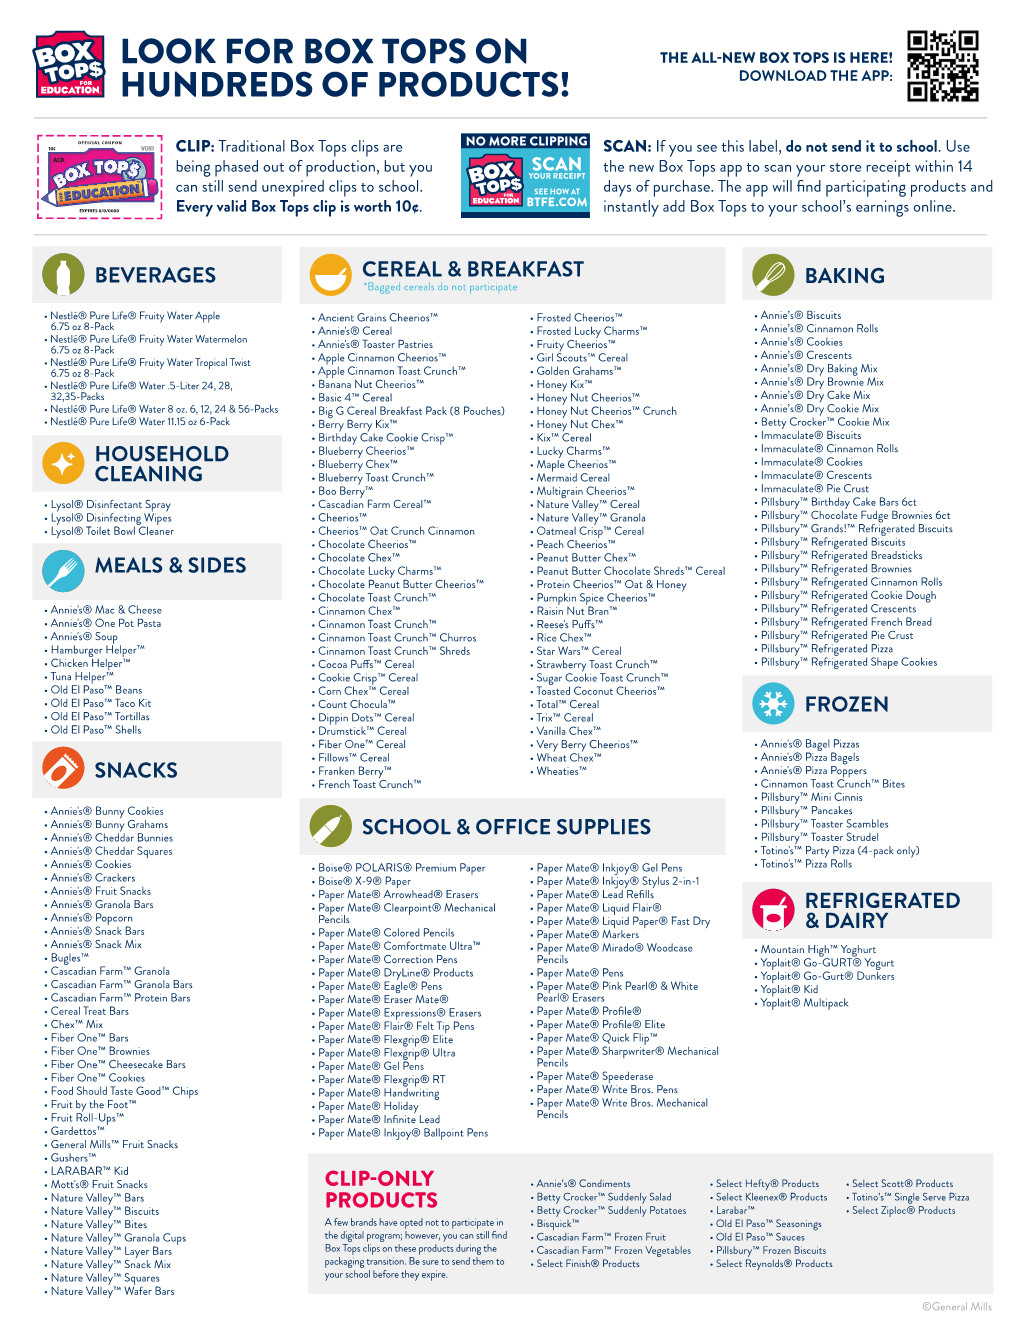 Box Tops on the All New Box Tops Is Here! Hundreds of Products! Download the App